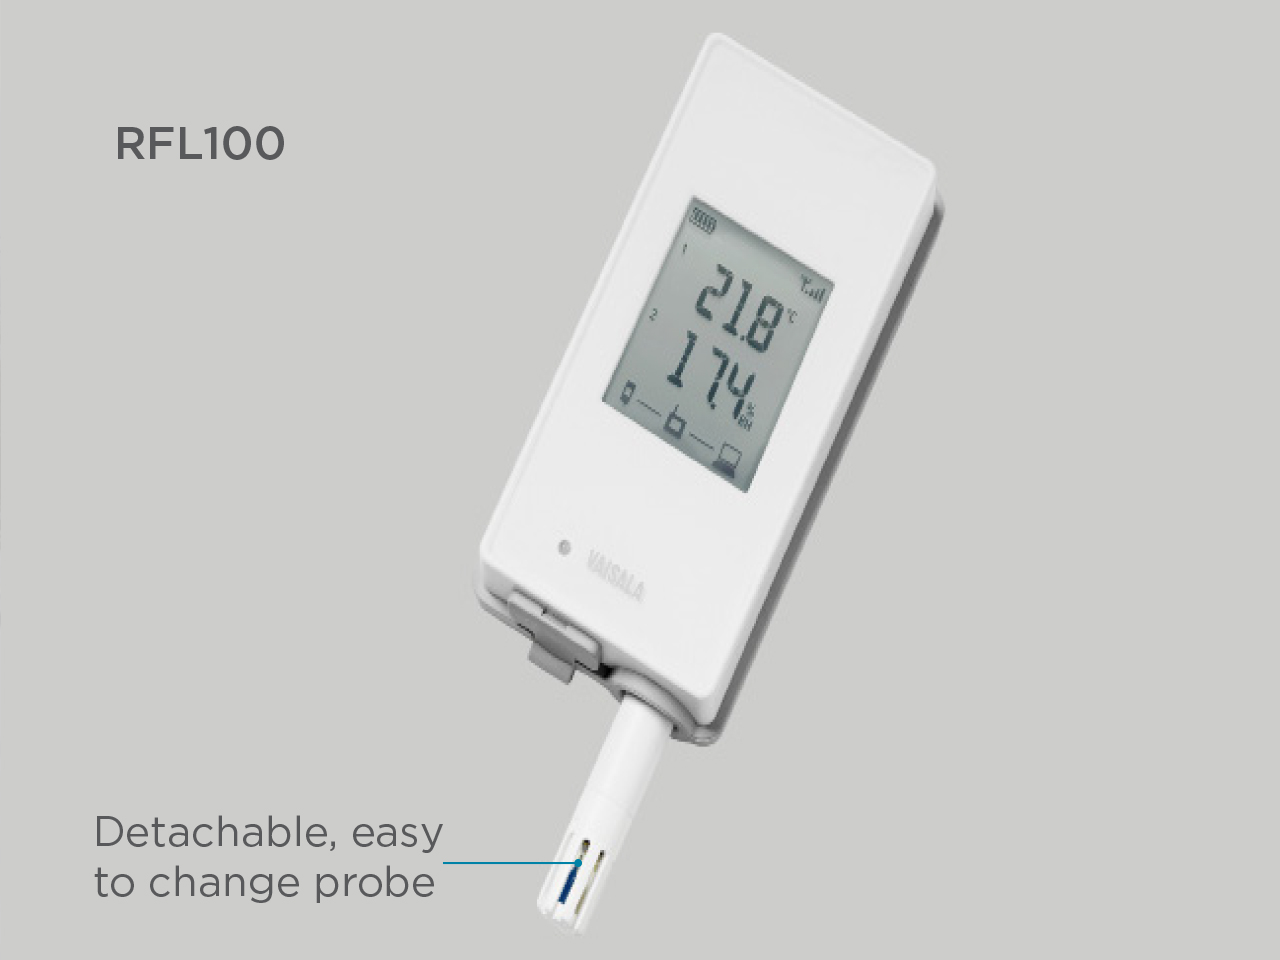 RFL100 with detachable, easy to change the probe